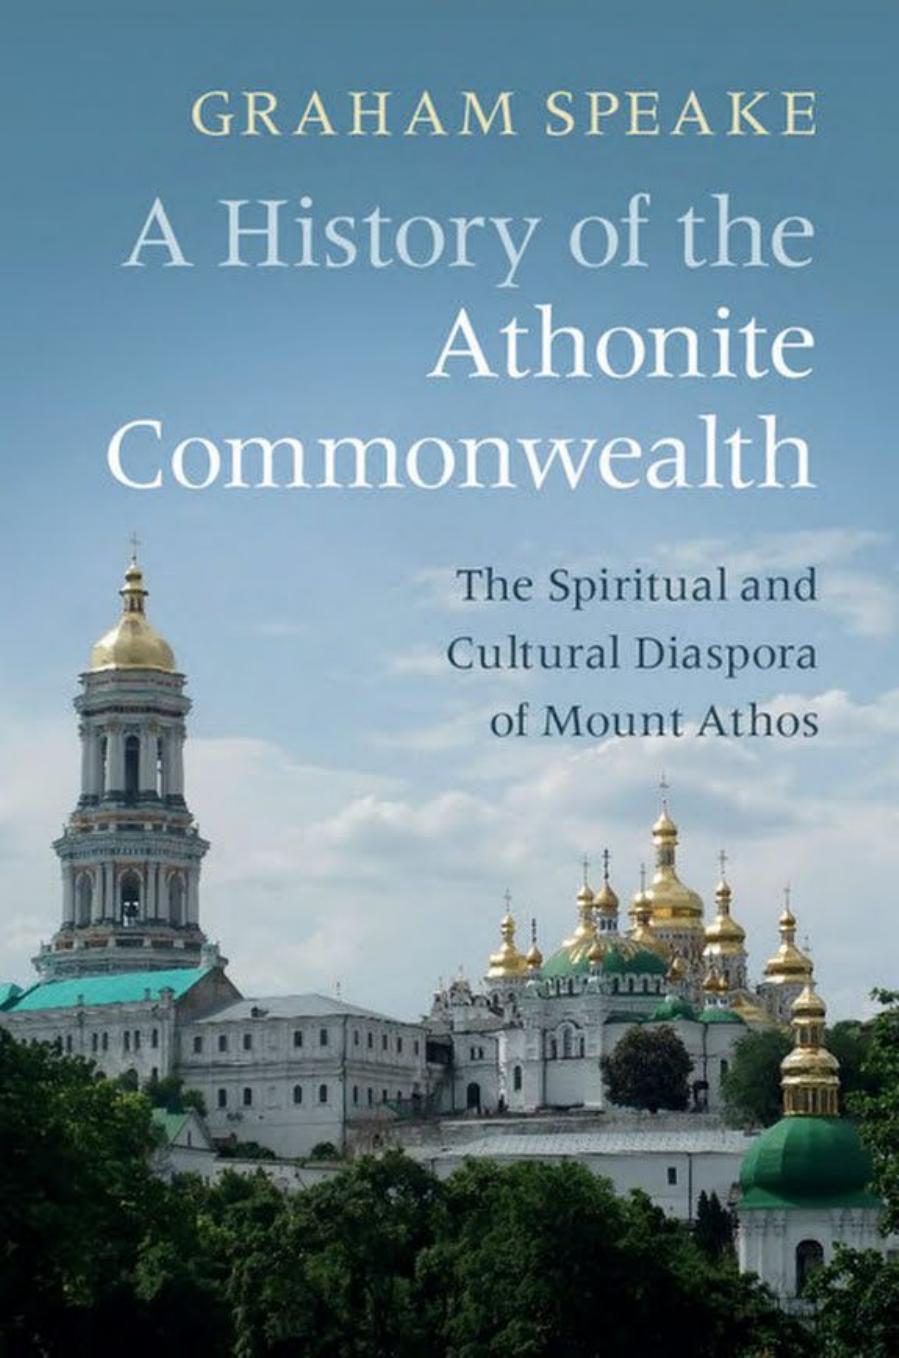 A History of the Athonite Commonwealth  The Spiritual and Cultural Diaspora of Mount Athos, 2018